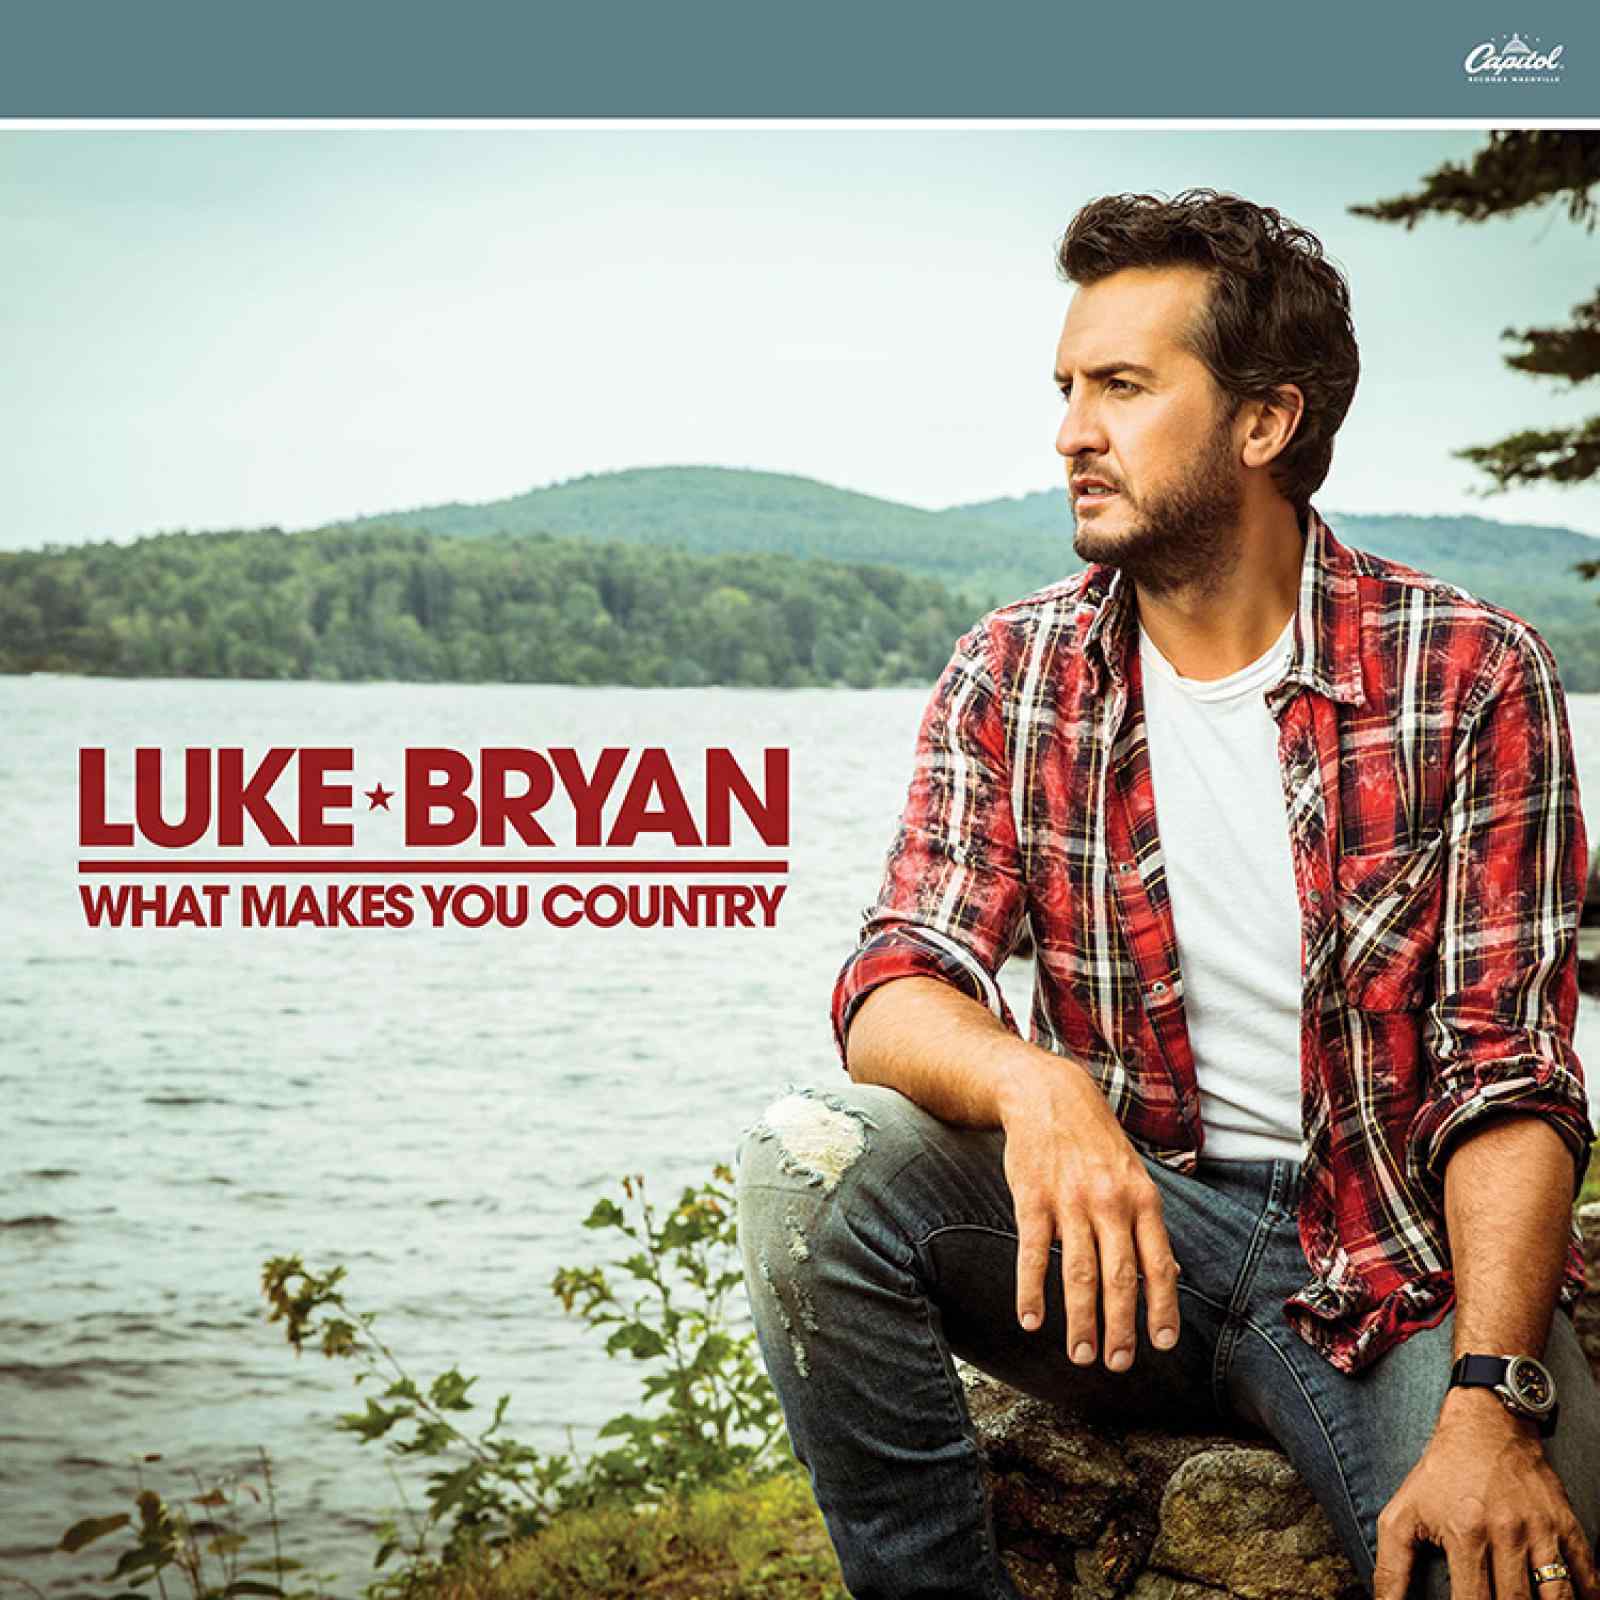 Luke Bryan Launches WHAT MAKES YOU COUNTRY Album with New RIAA Certifications and TV Appearances